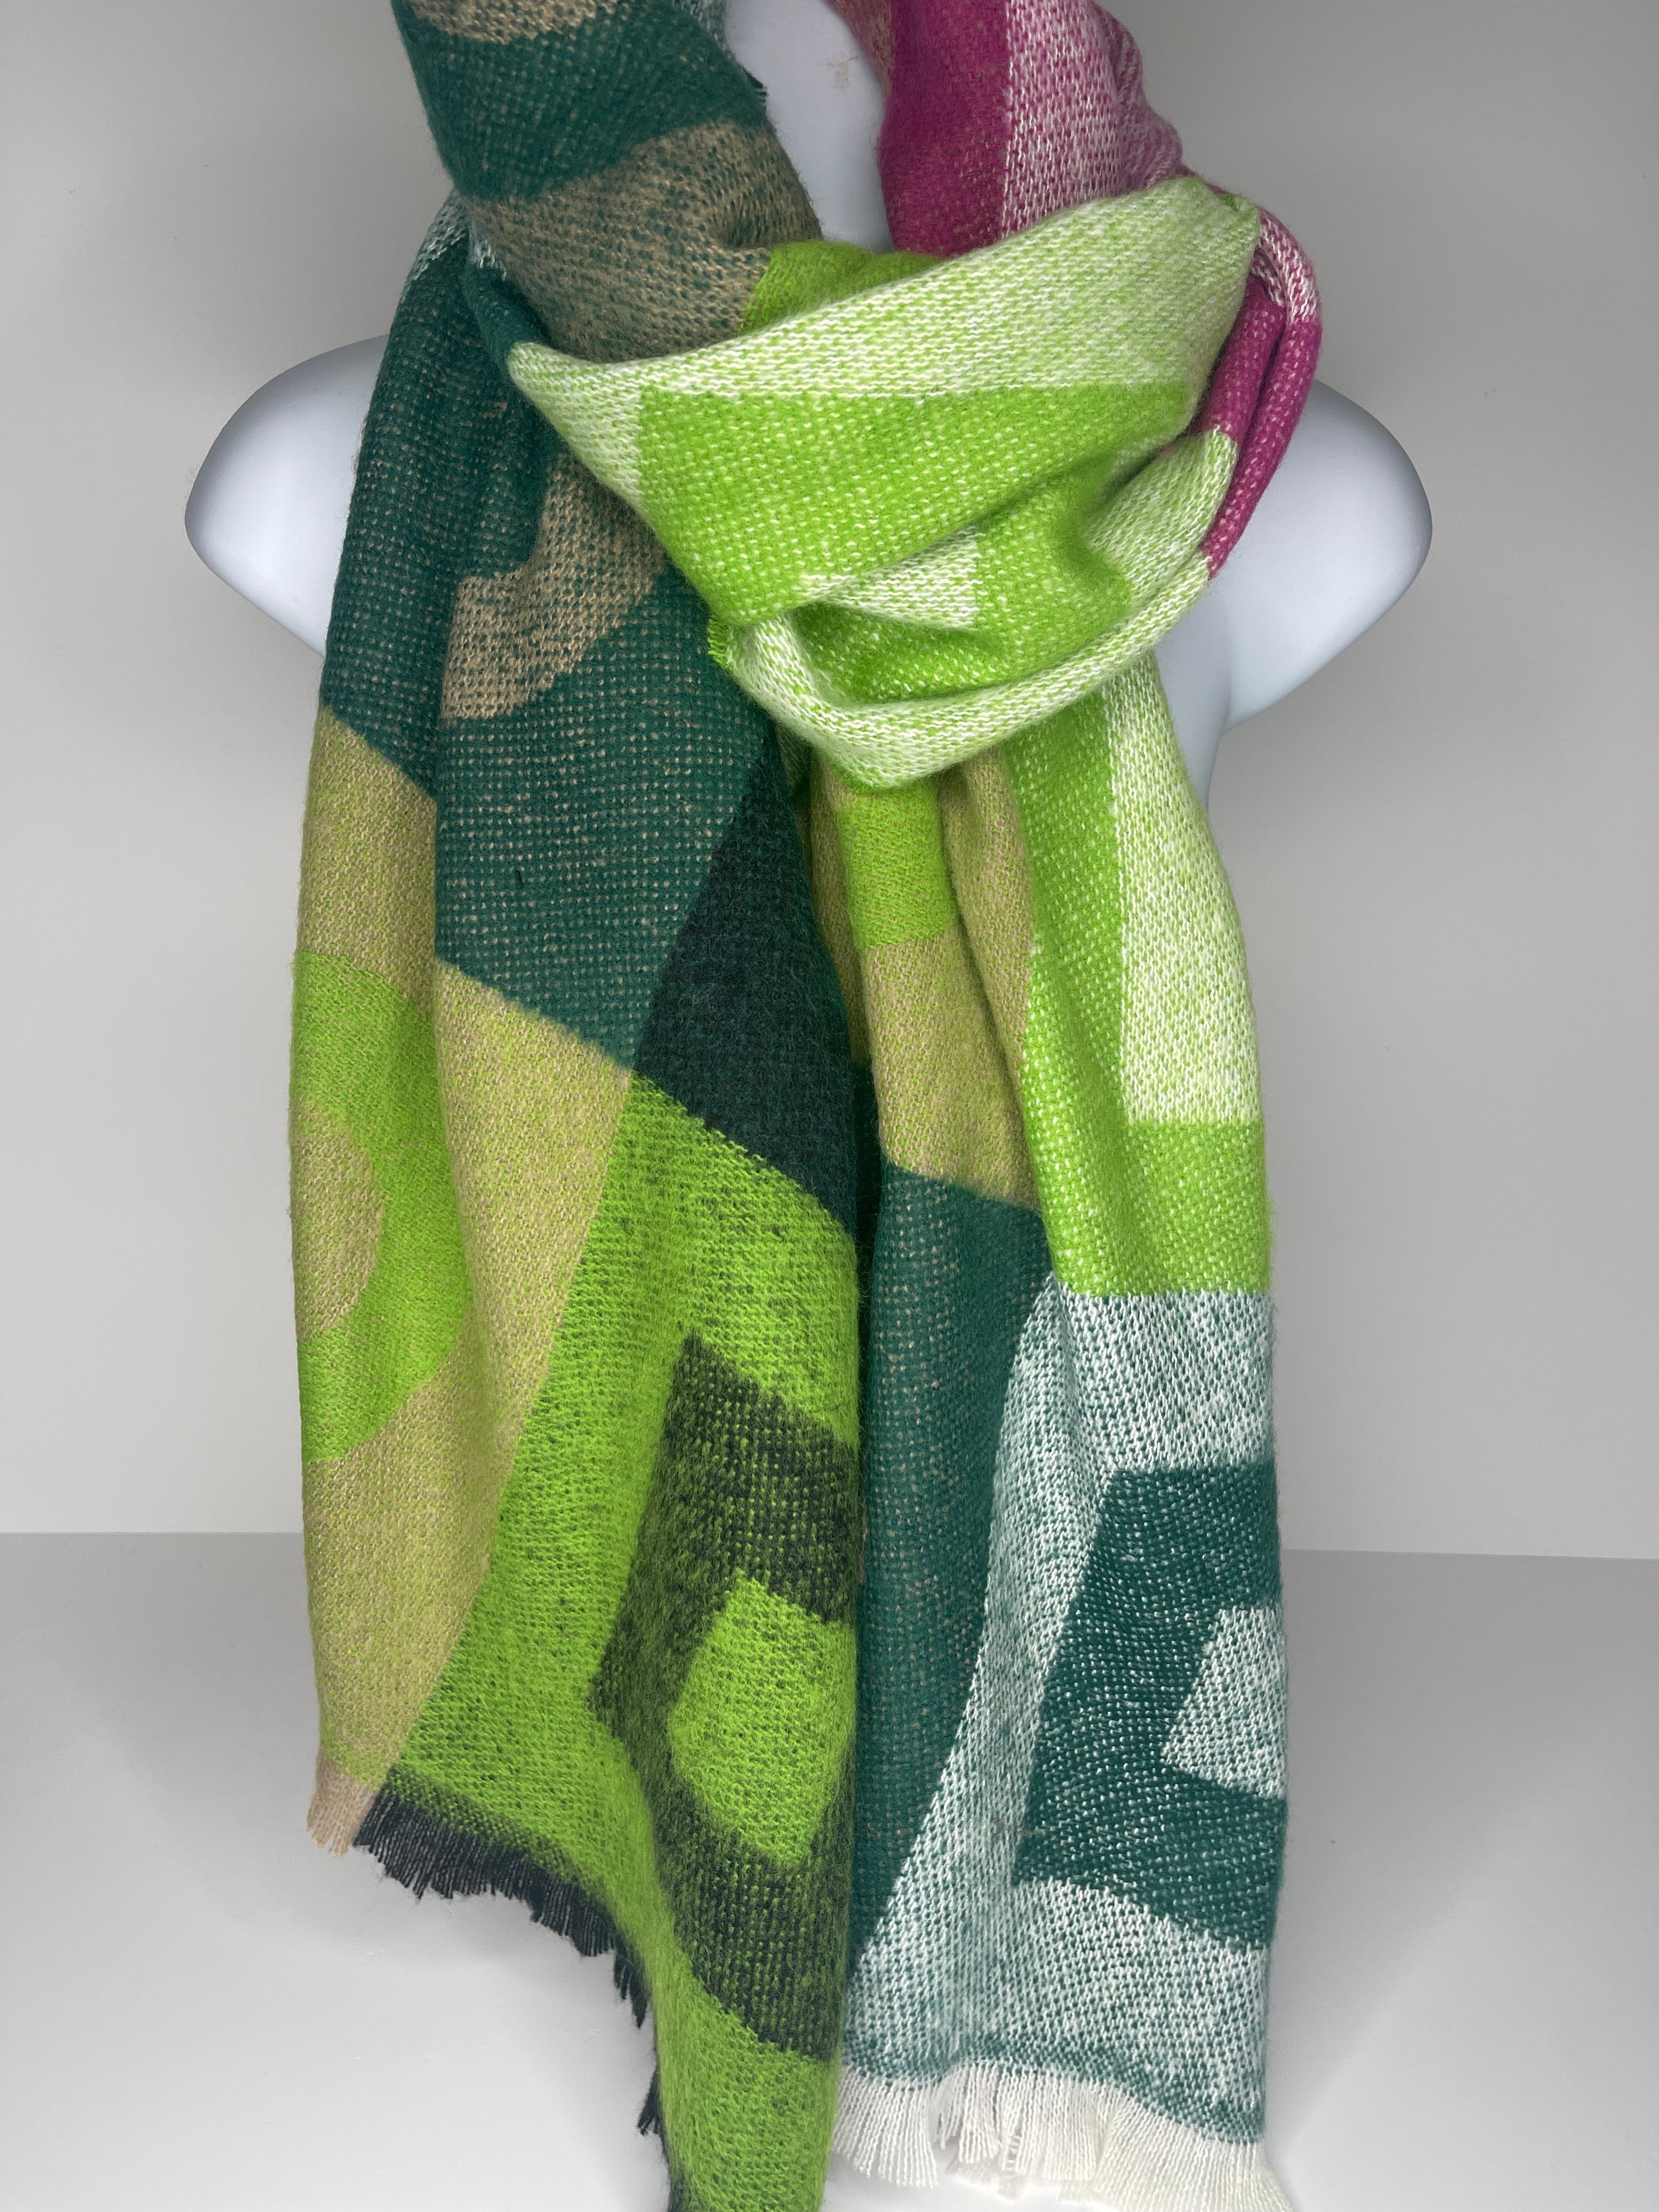 Winter weight 'square and o' print scarf in colours of lime green, white, fuchsia, black, forest green and apple green